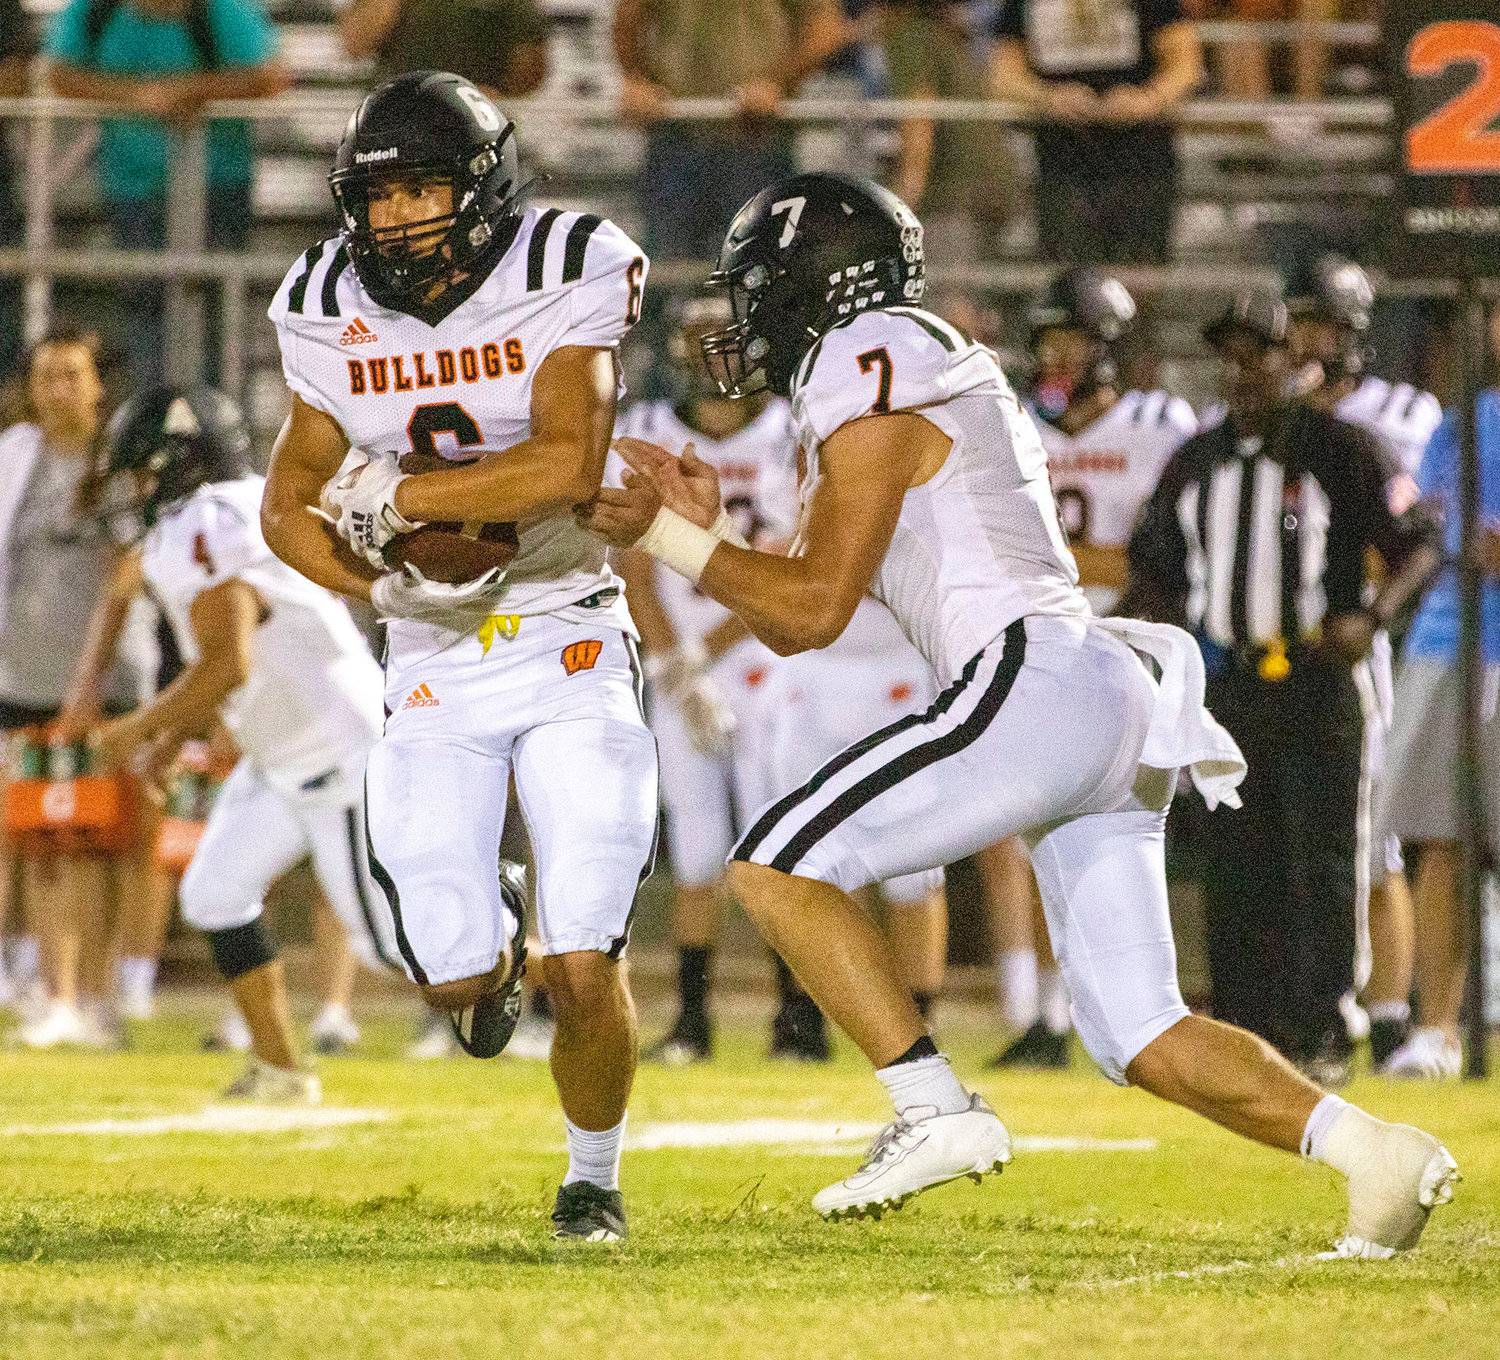 Wayne senior Jairo Hernandez takes a handoff from quarterback Ethan Mullins Friday night during Wayne’s 46-6 win over Lexington. Hernandez had four carries for 21 yards and a touchdown.